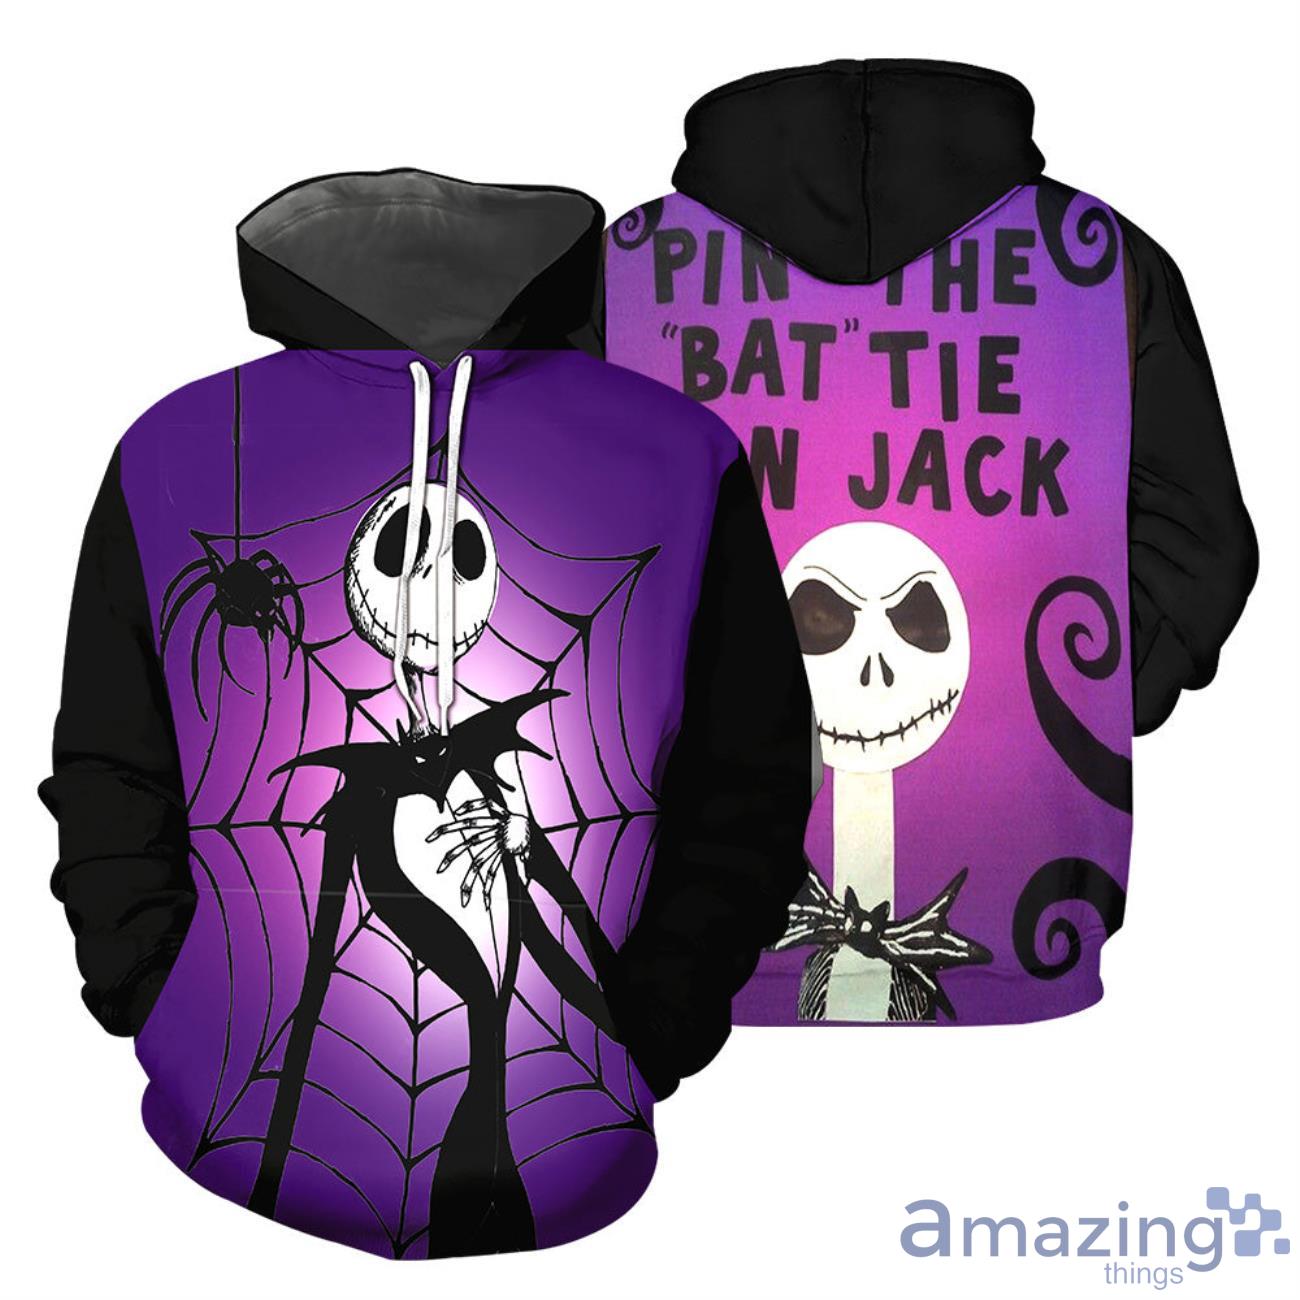 Jack Skellington Pin The Bat Tie On Jack Halloween Gift 3D All Over Printed Shirts Product Photo 1